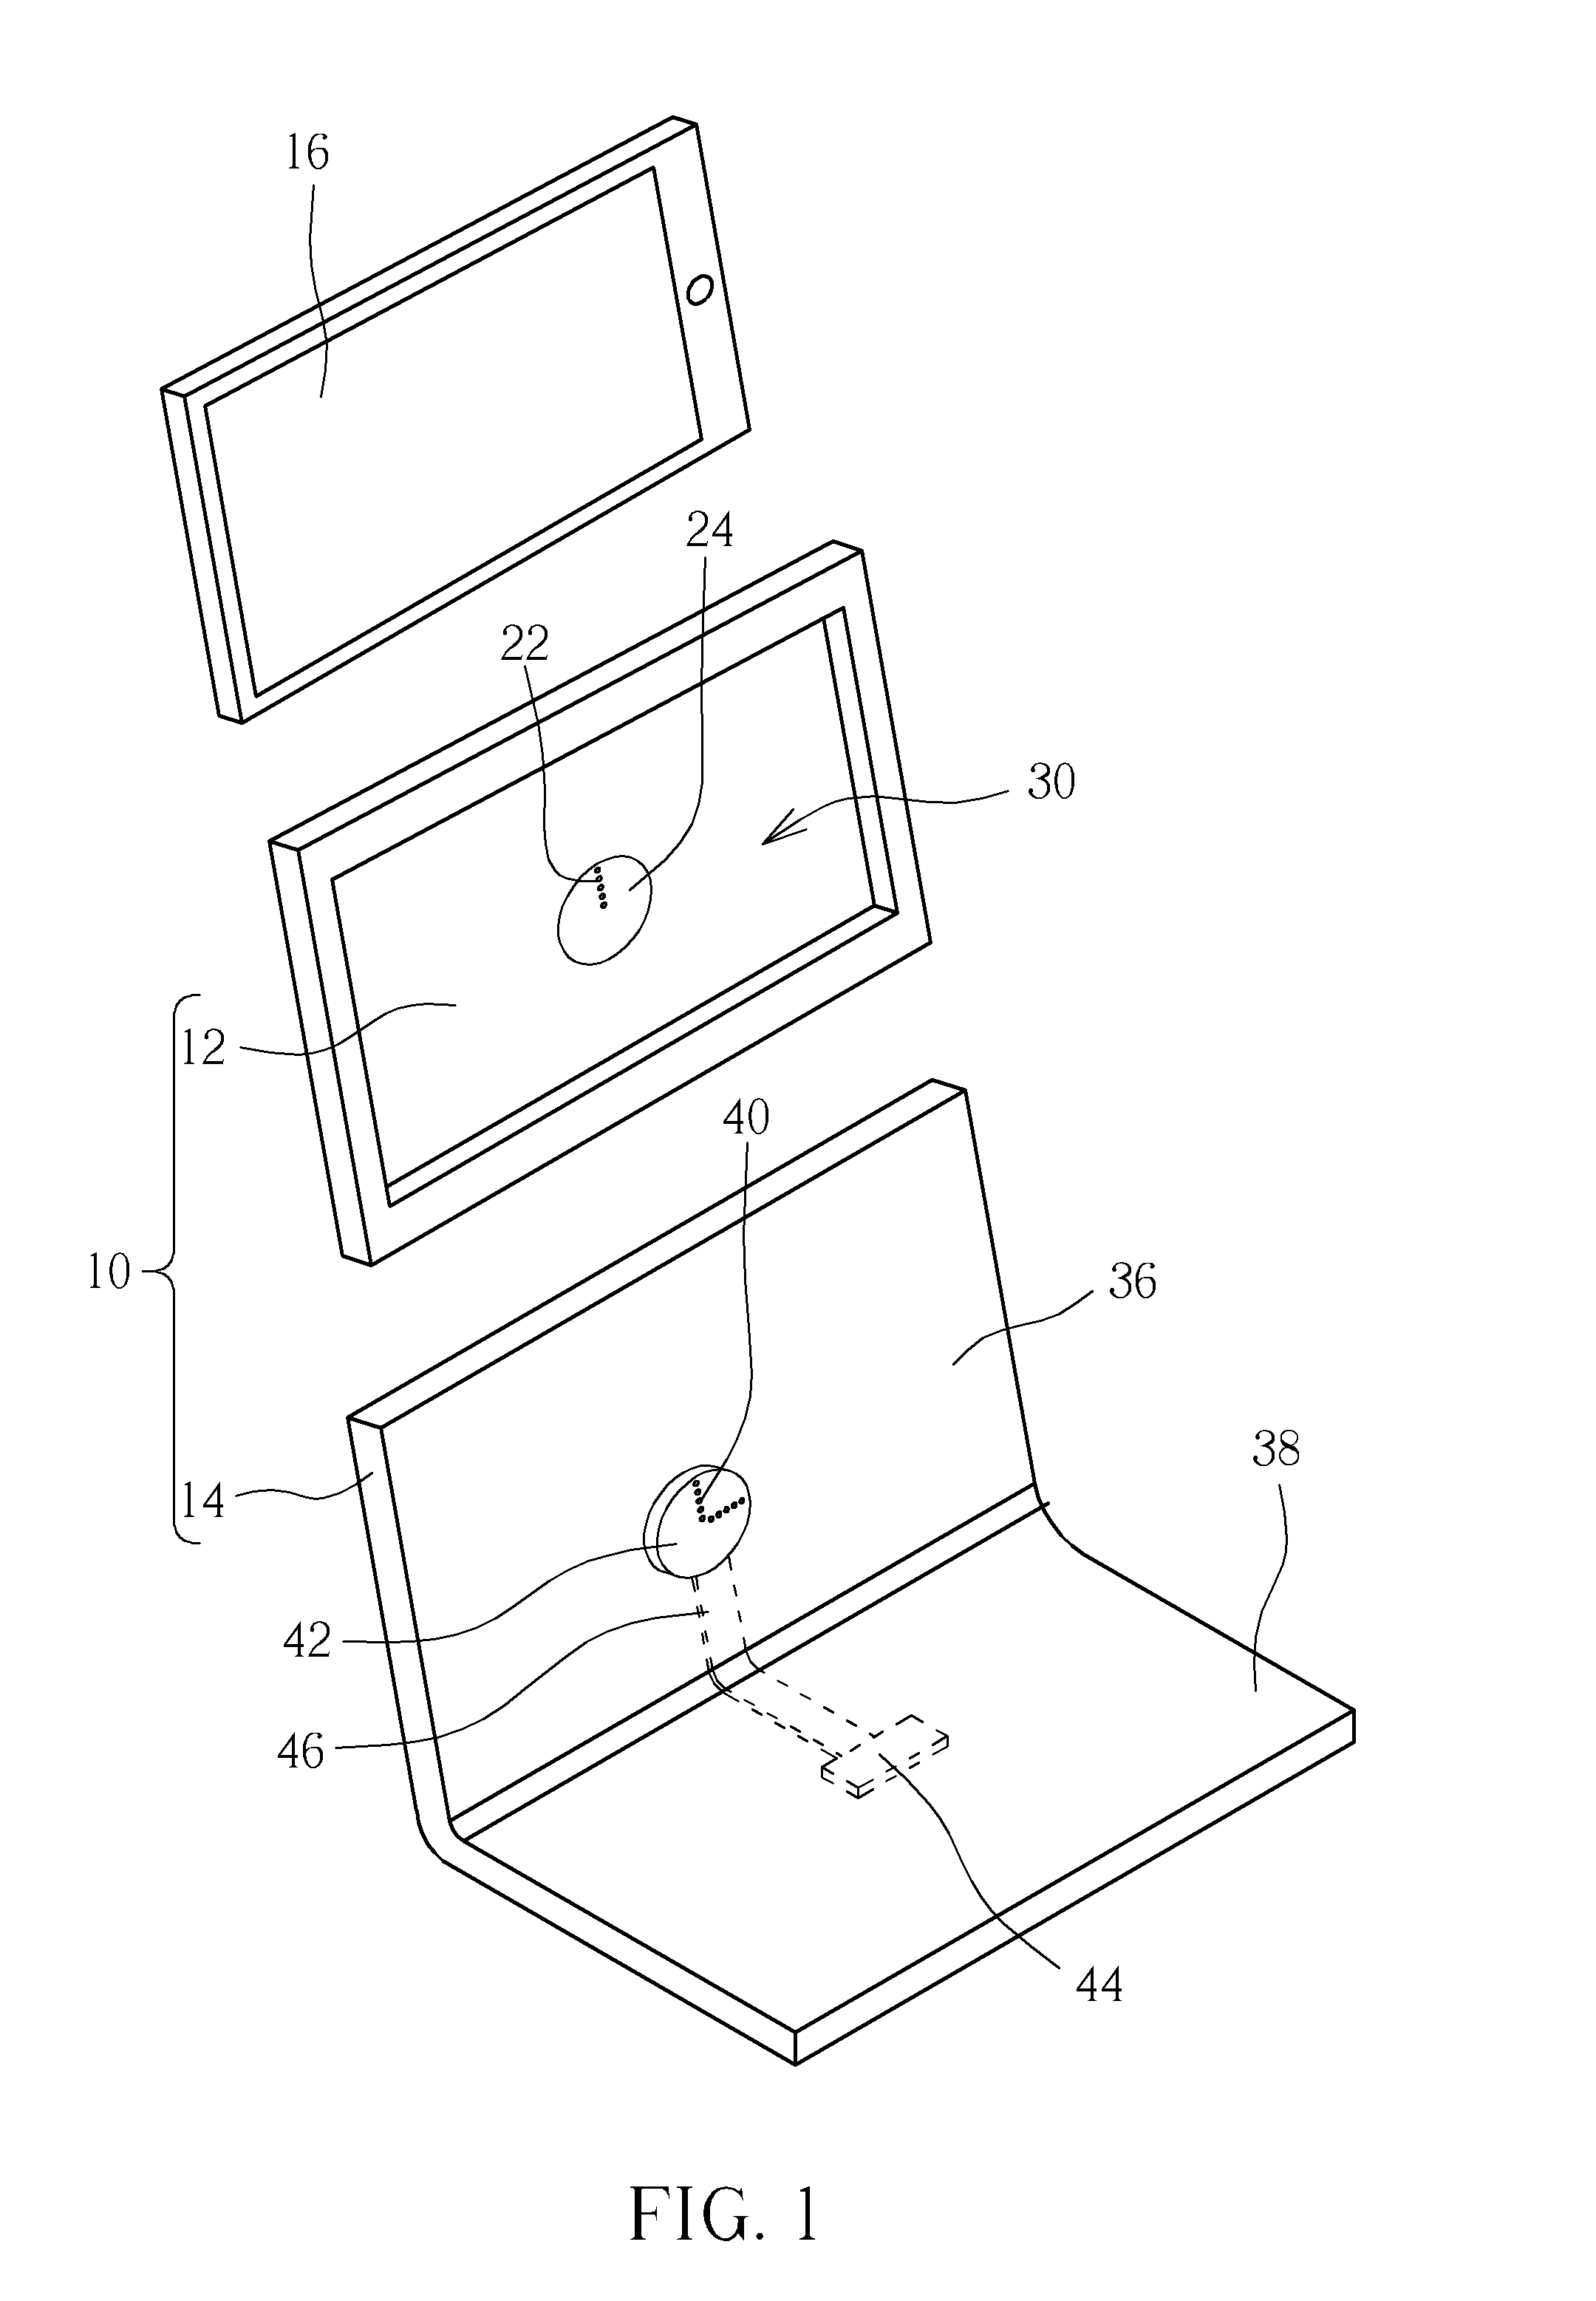 Protection device capable of rotatably supporting a portable electronic device